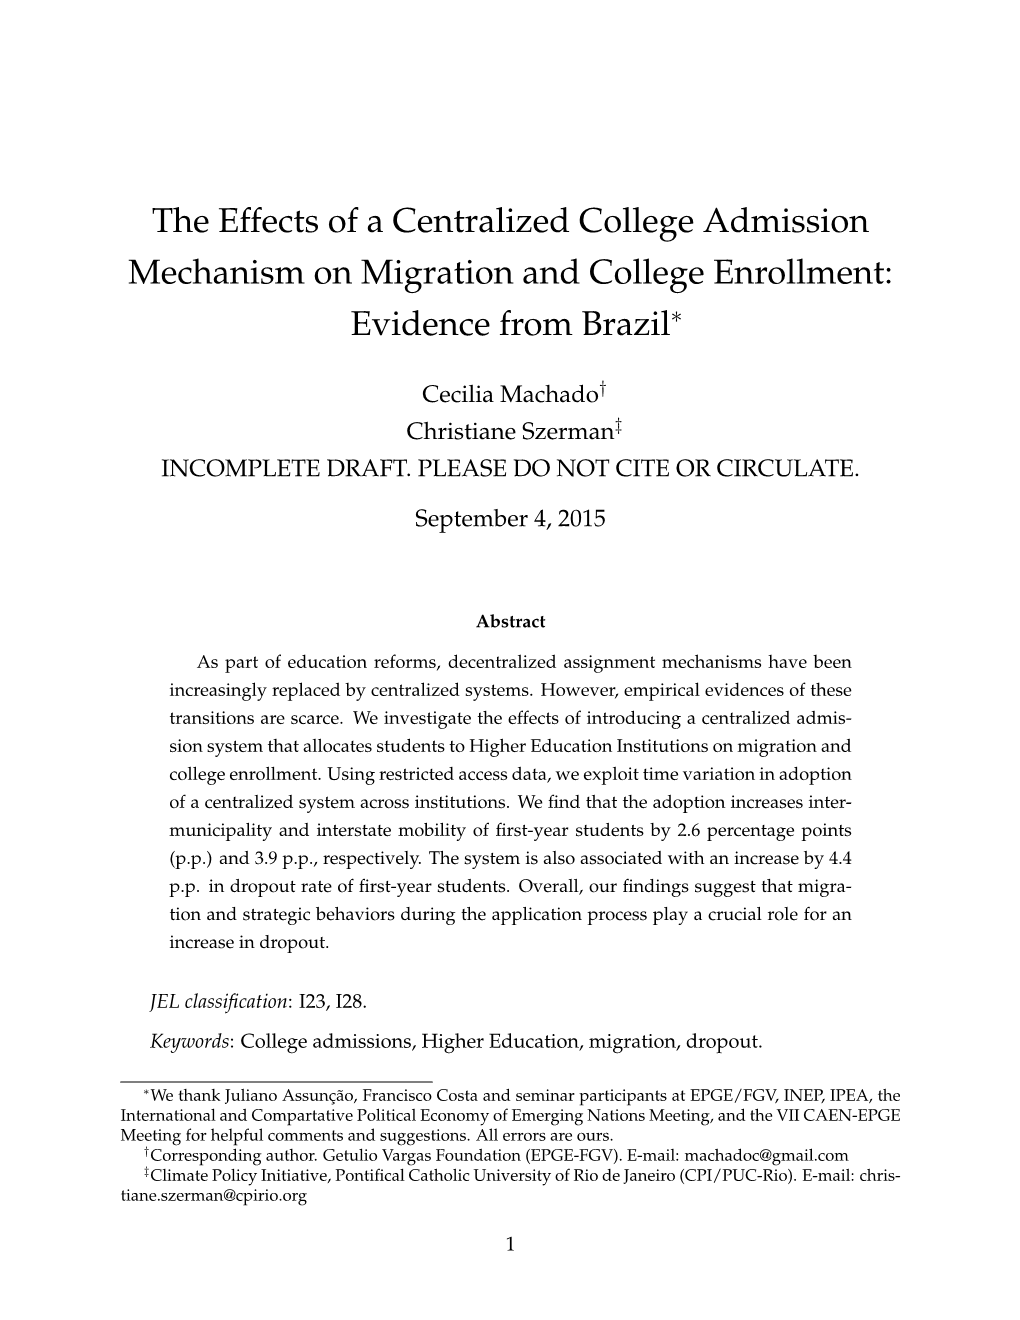 The Effects of a Centralized College Admission Mechanism on Migration and College Enrollment: Evidence from Brazil∗